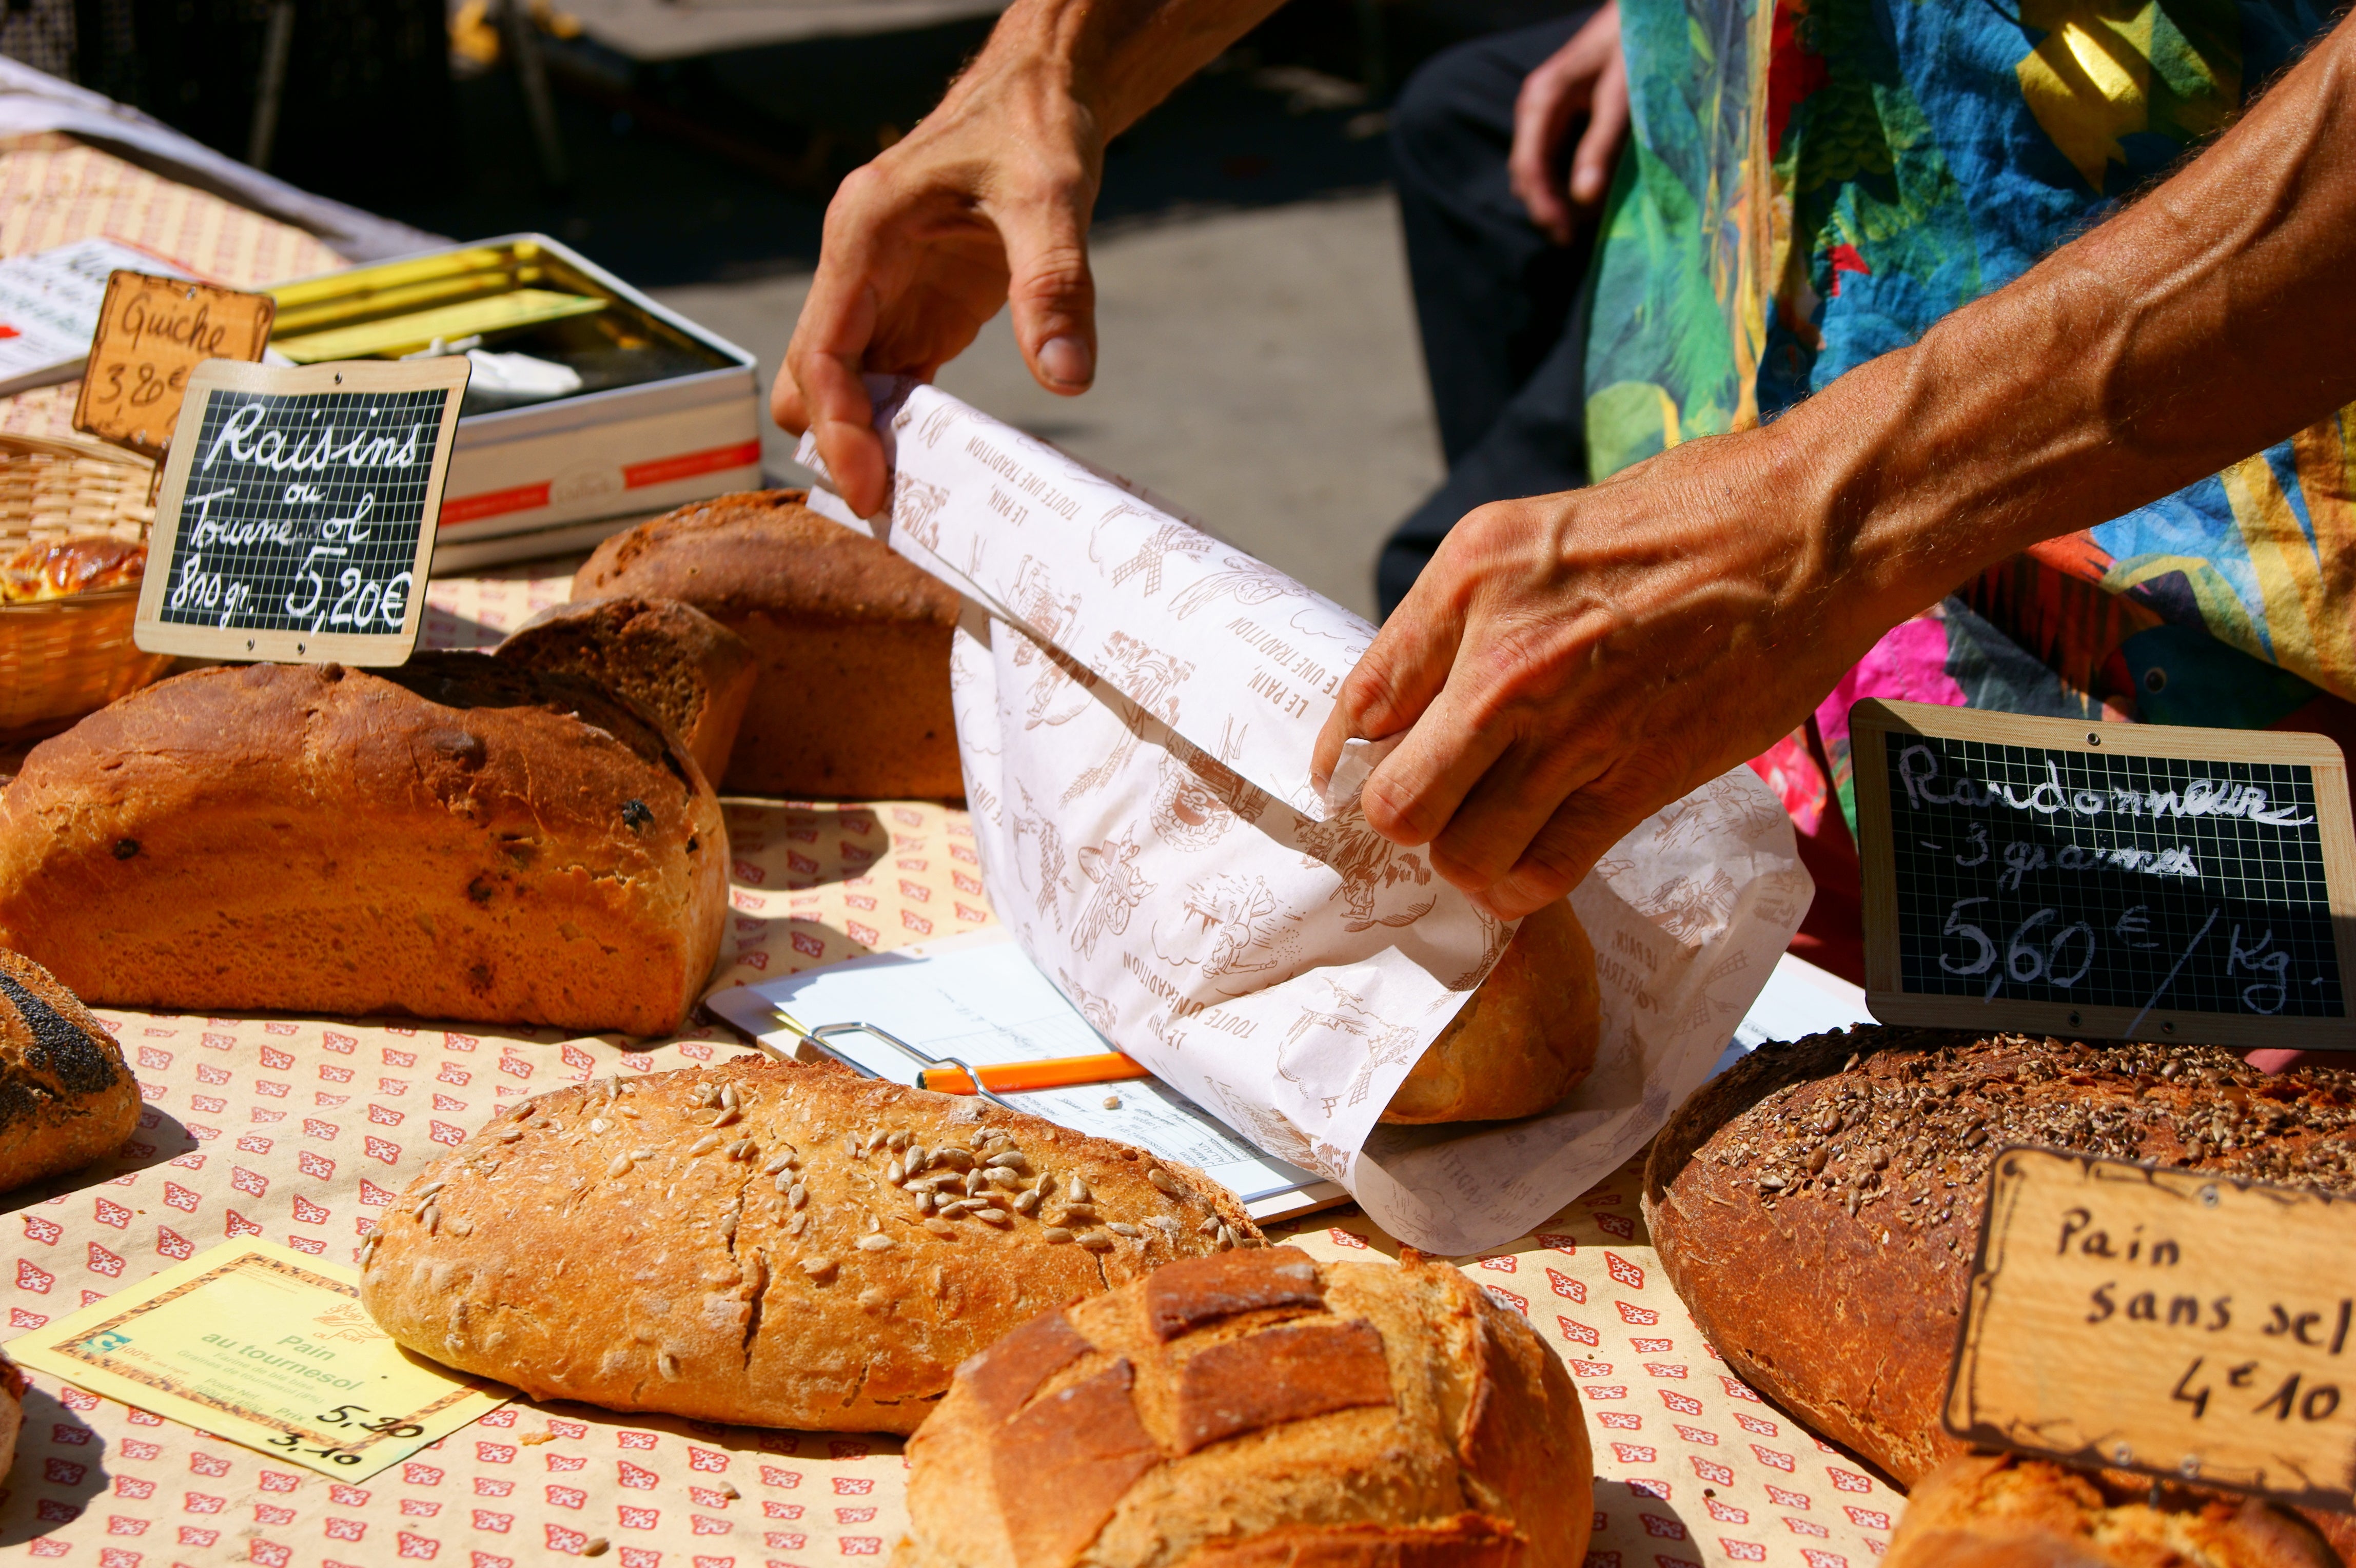 Selling bread at a market